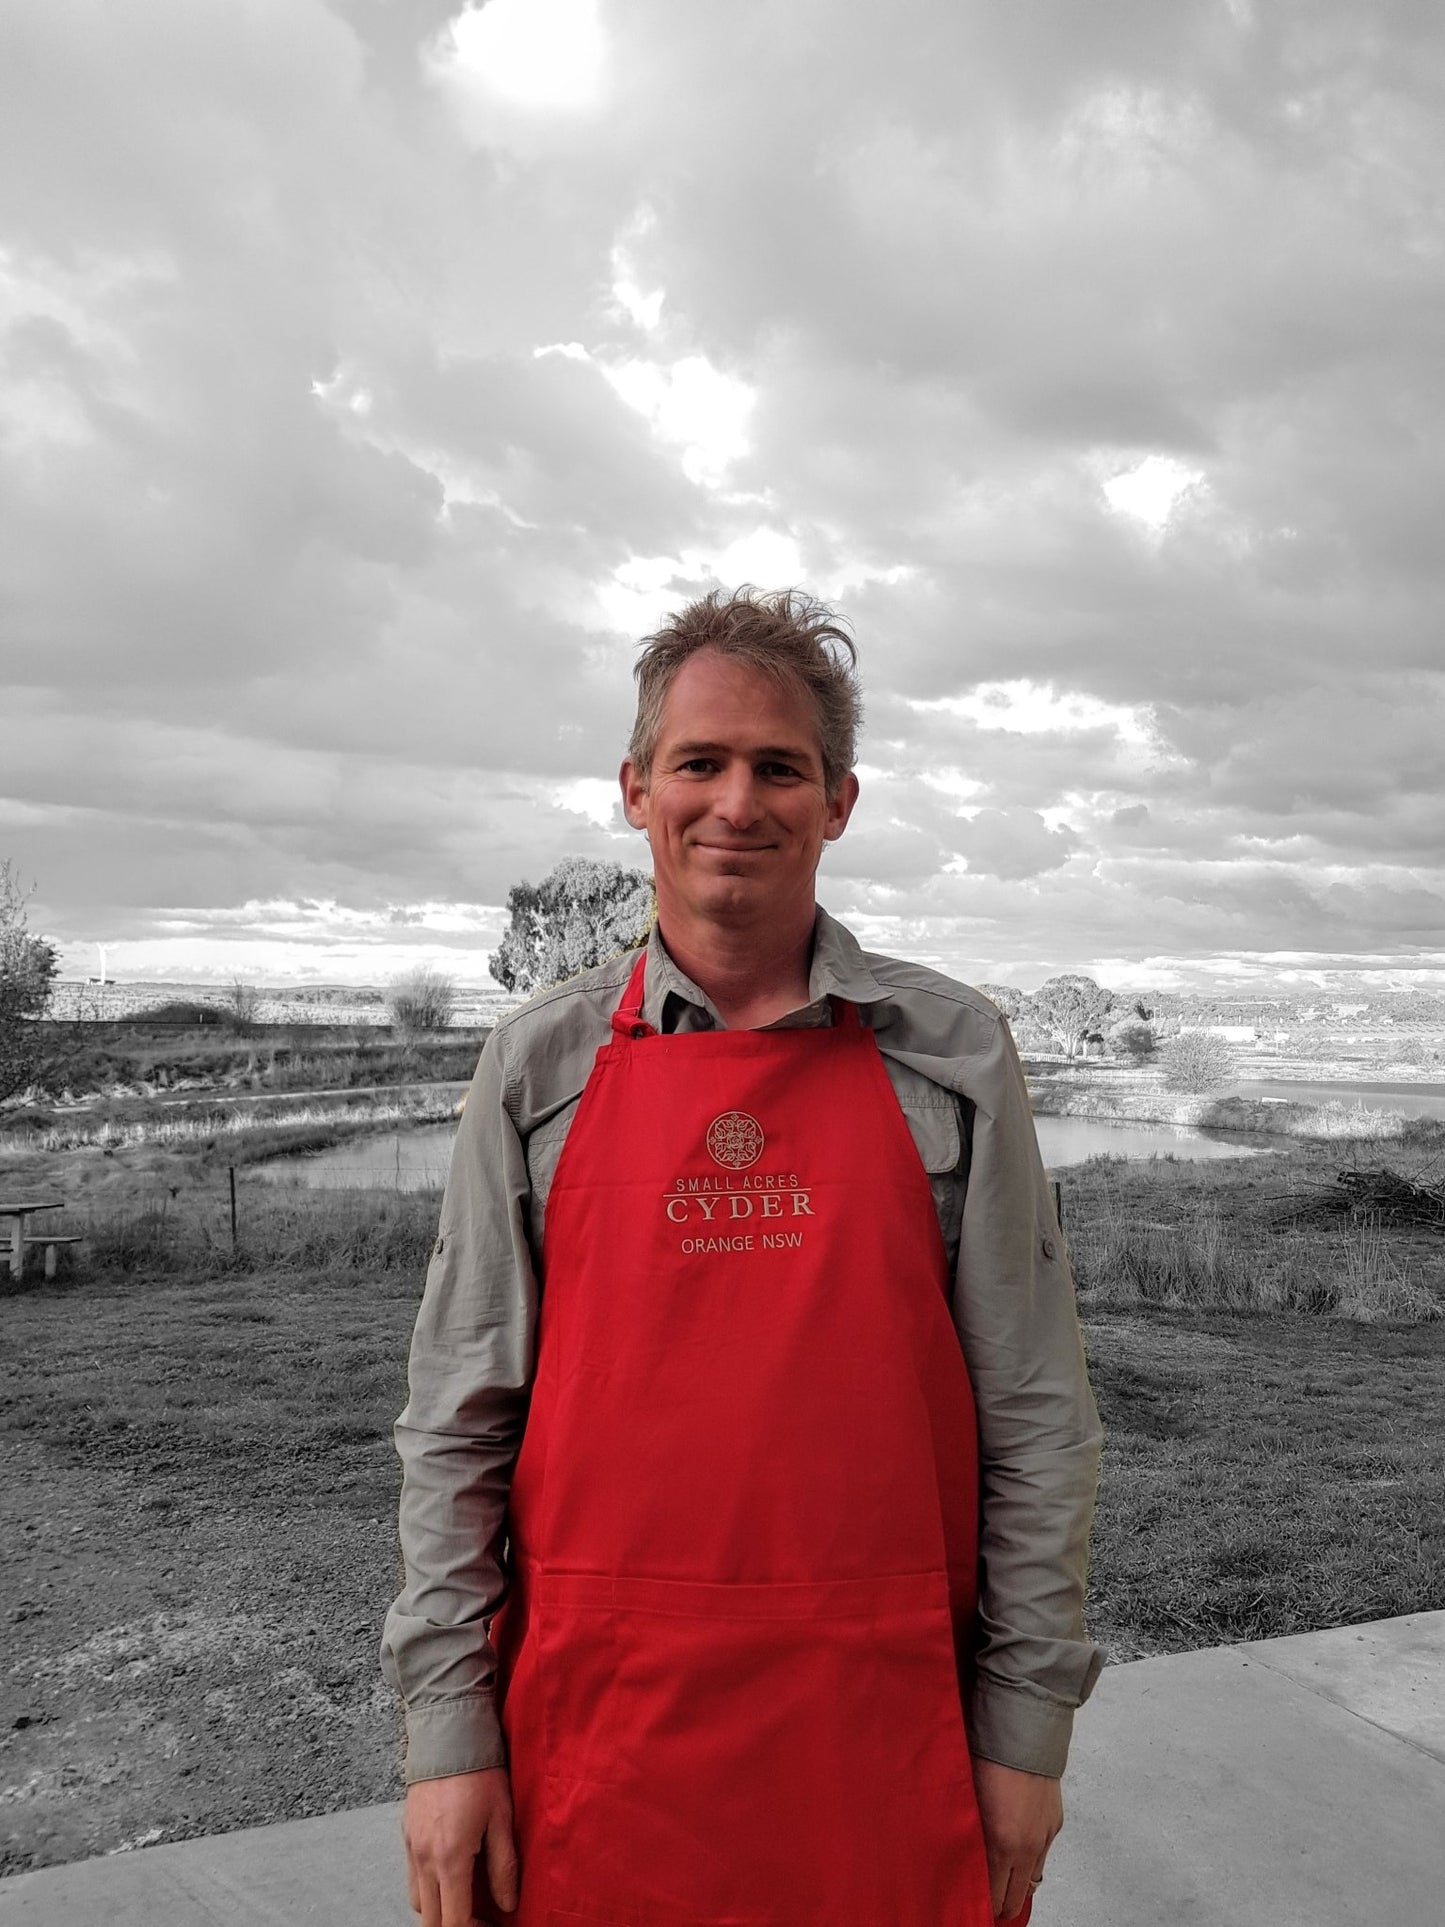 A man with umkempt hair stands before a clouded rural backdrop wearing a red Apron. Most of the image is monochrome except the Red apron and pink face and hands of the model - Small Acres Cyder